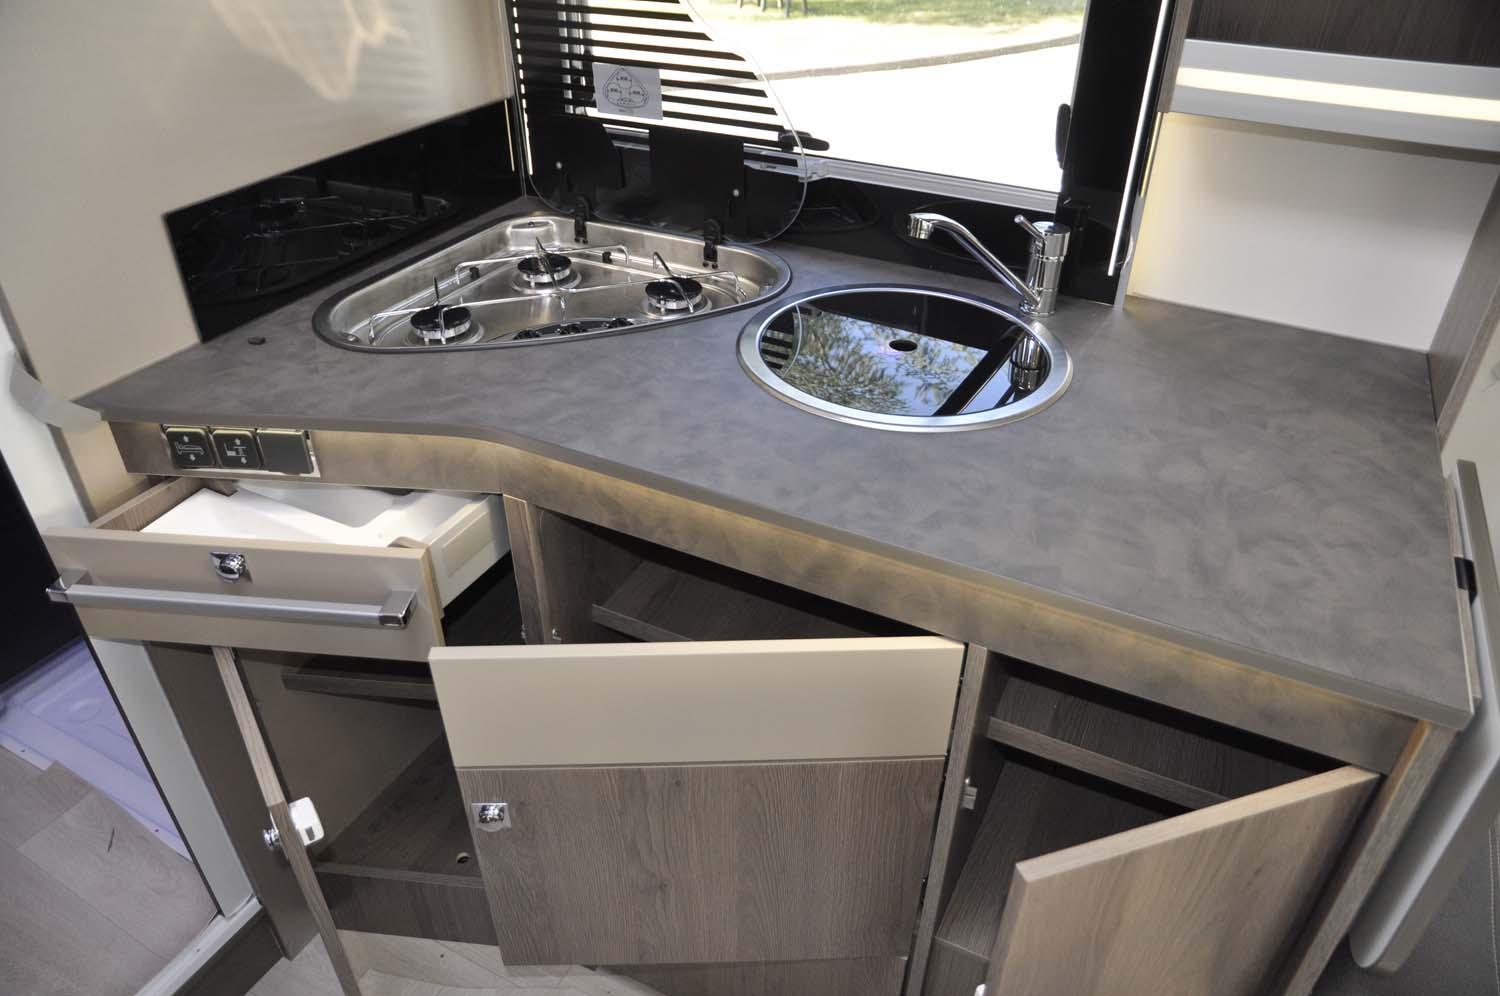 A motorhome in a slot machine, i.e. the Titanium series from Chausson – image 3